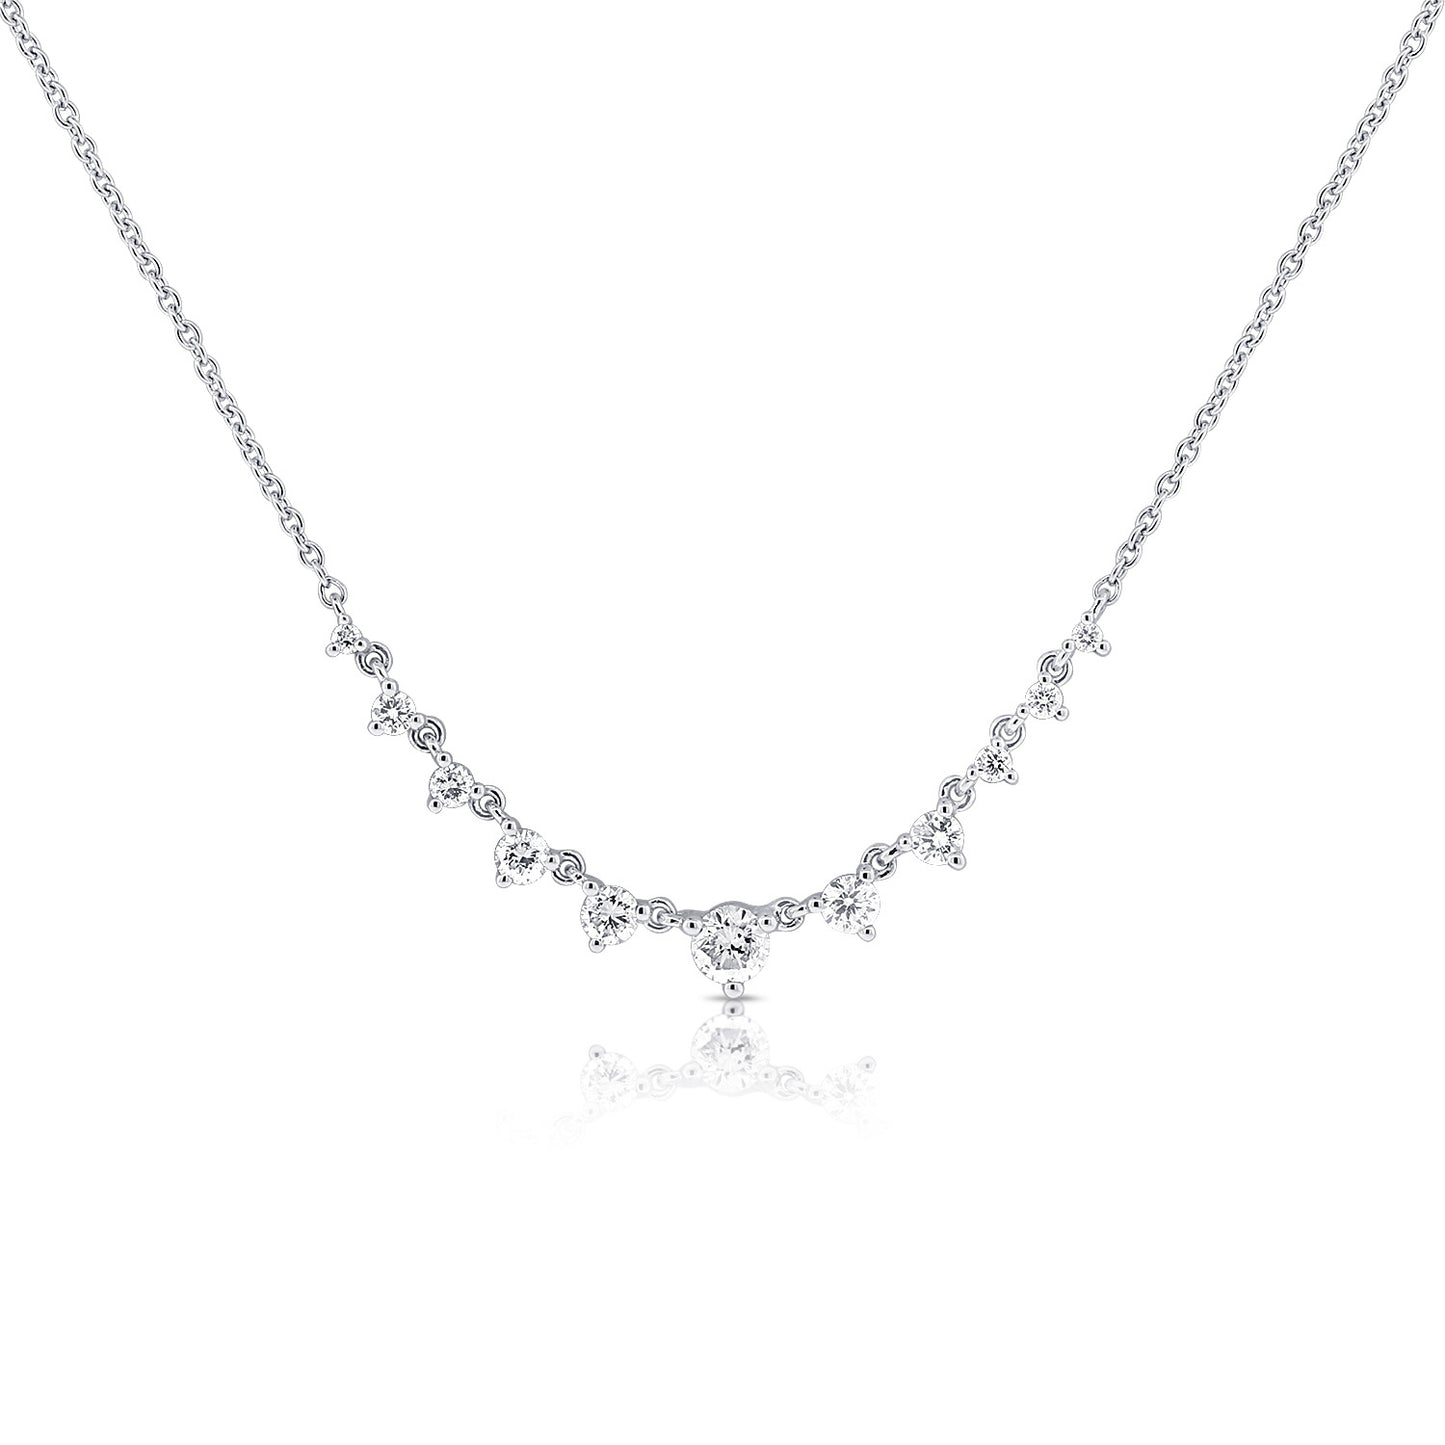 11 Station Graduated (3-Prong) Diamonds on Chain Necklace